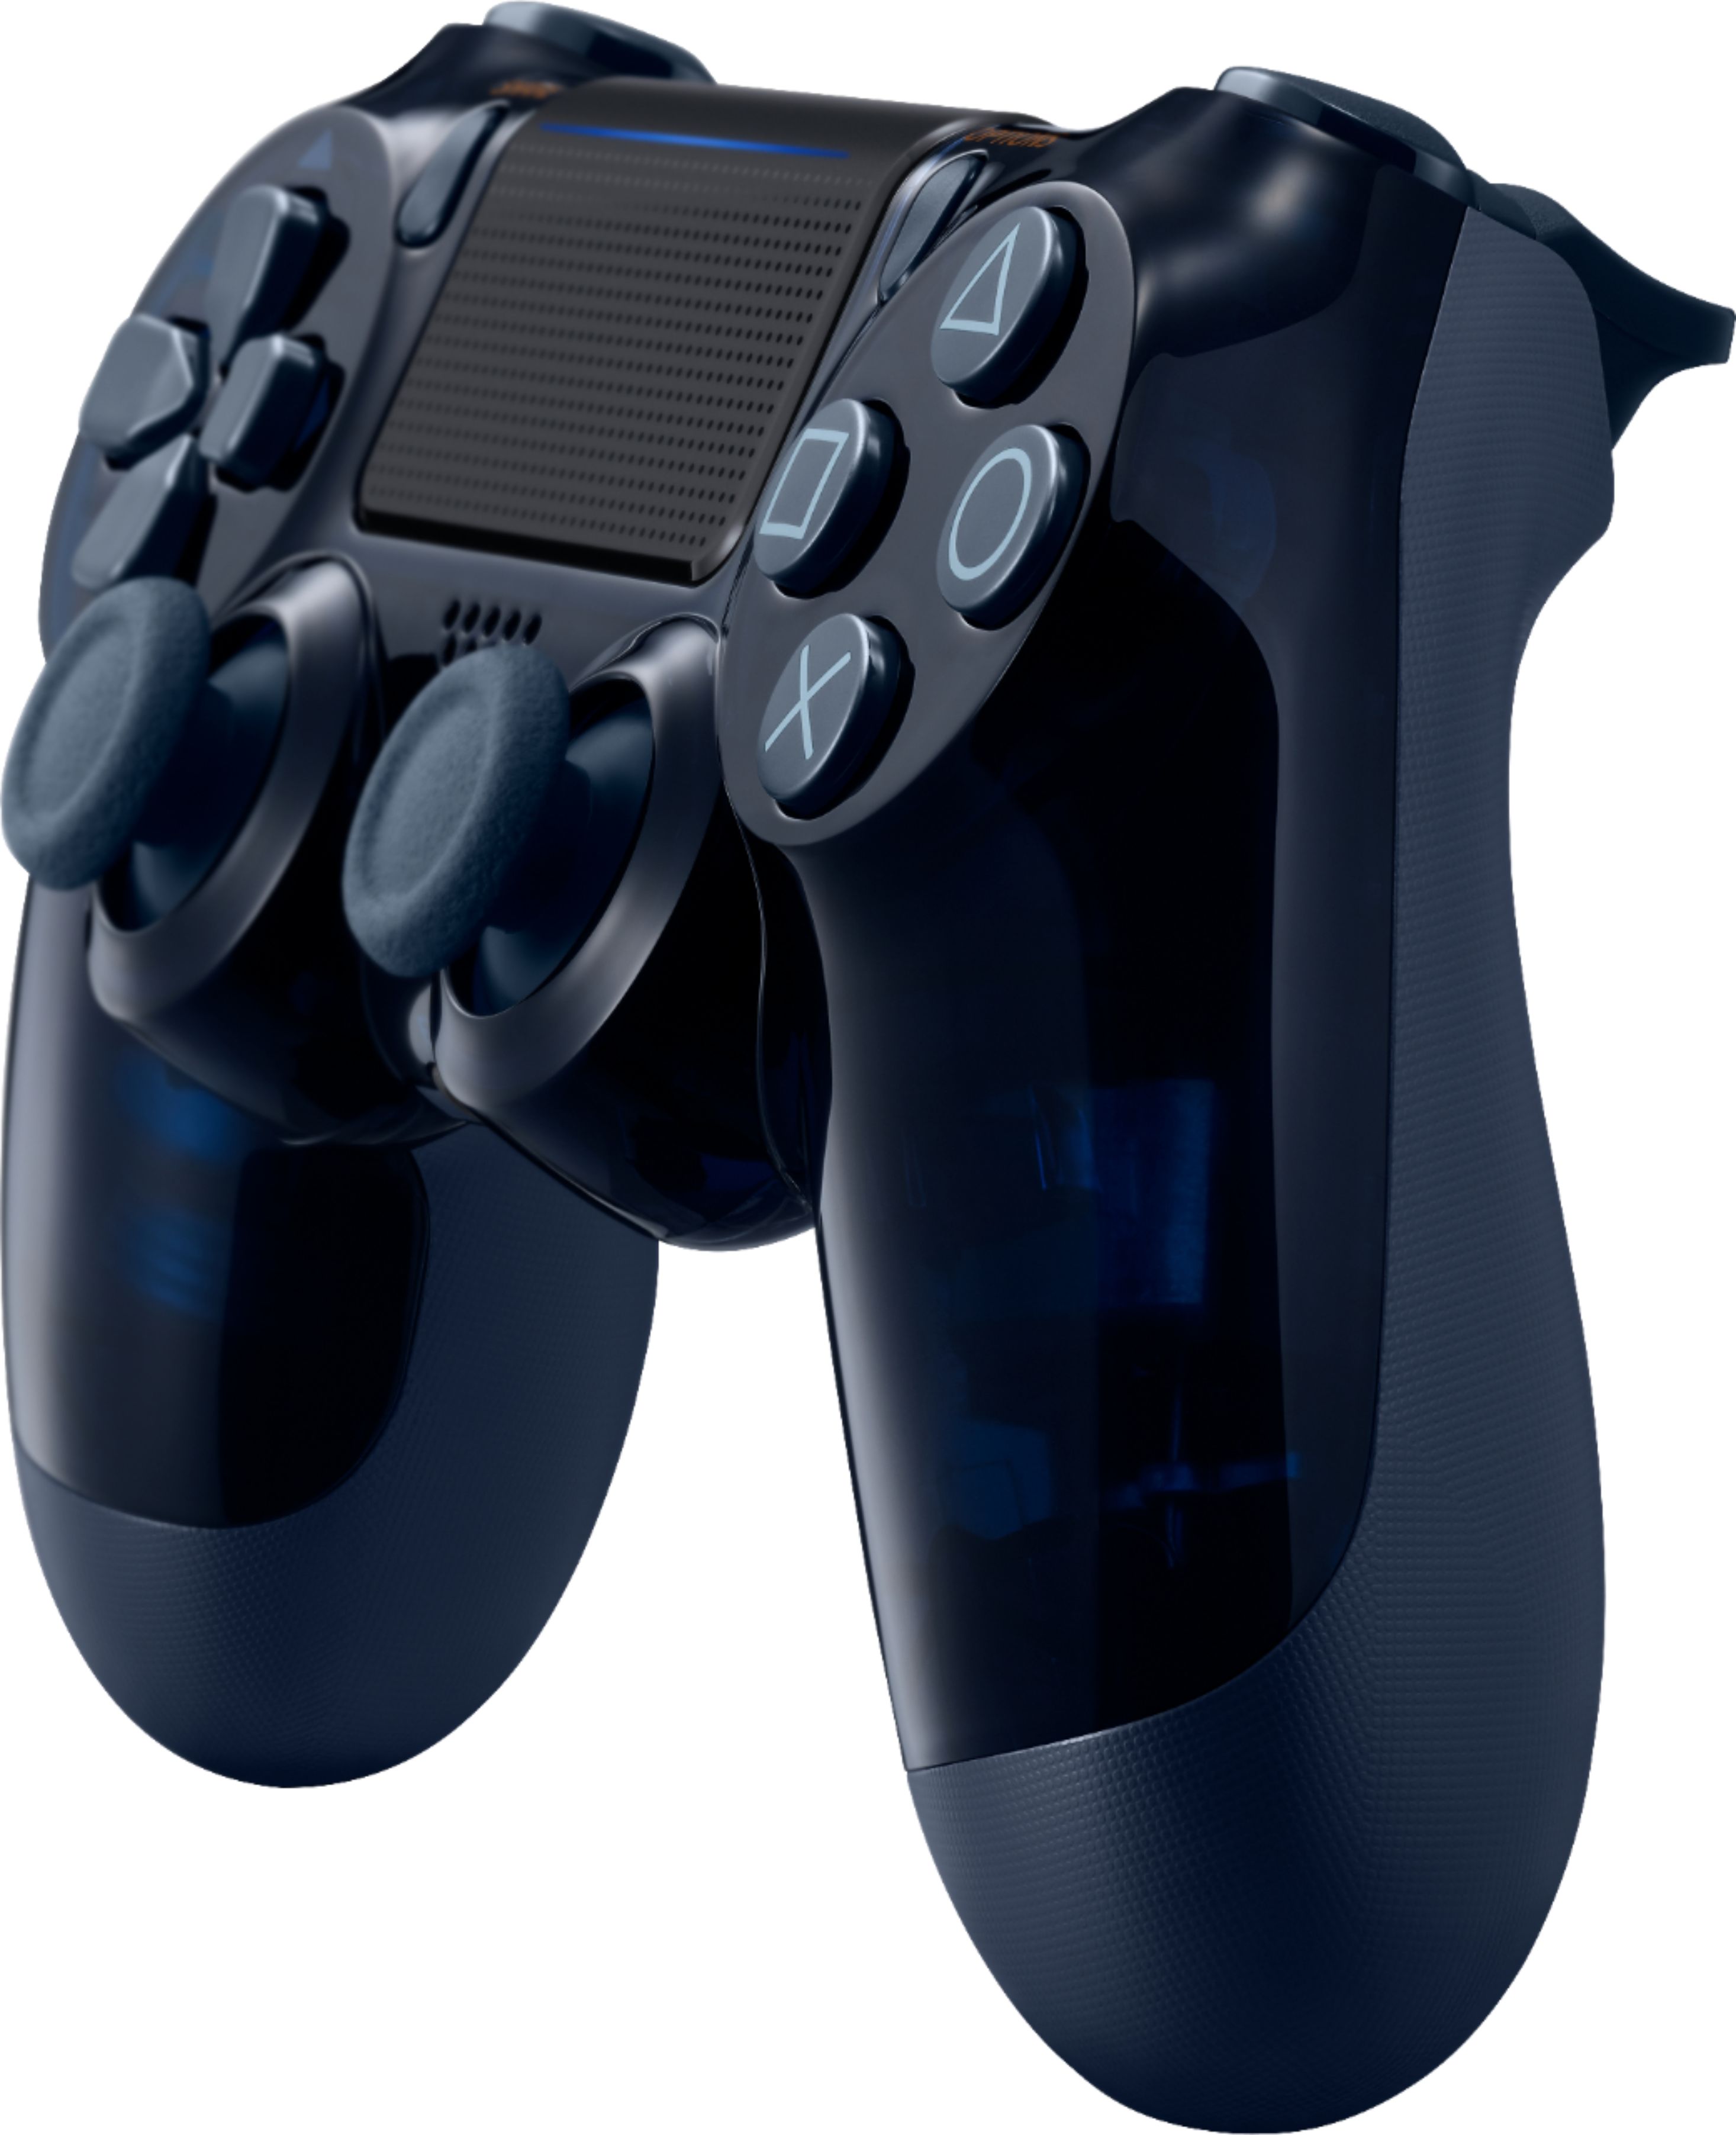 dualshock 4 500 limited edition